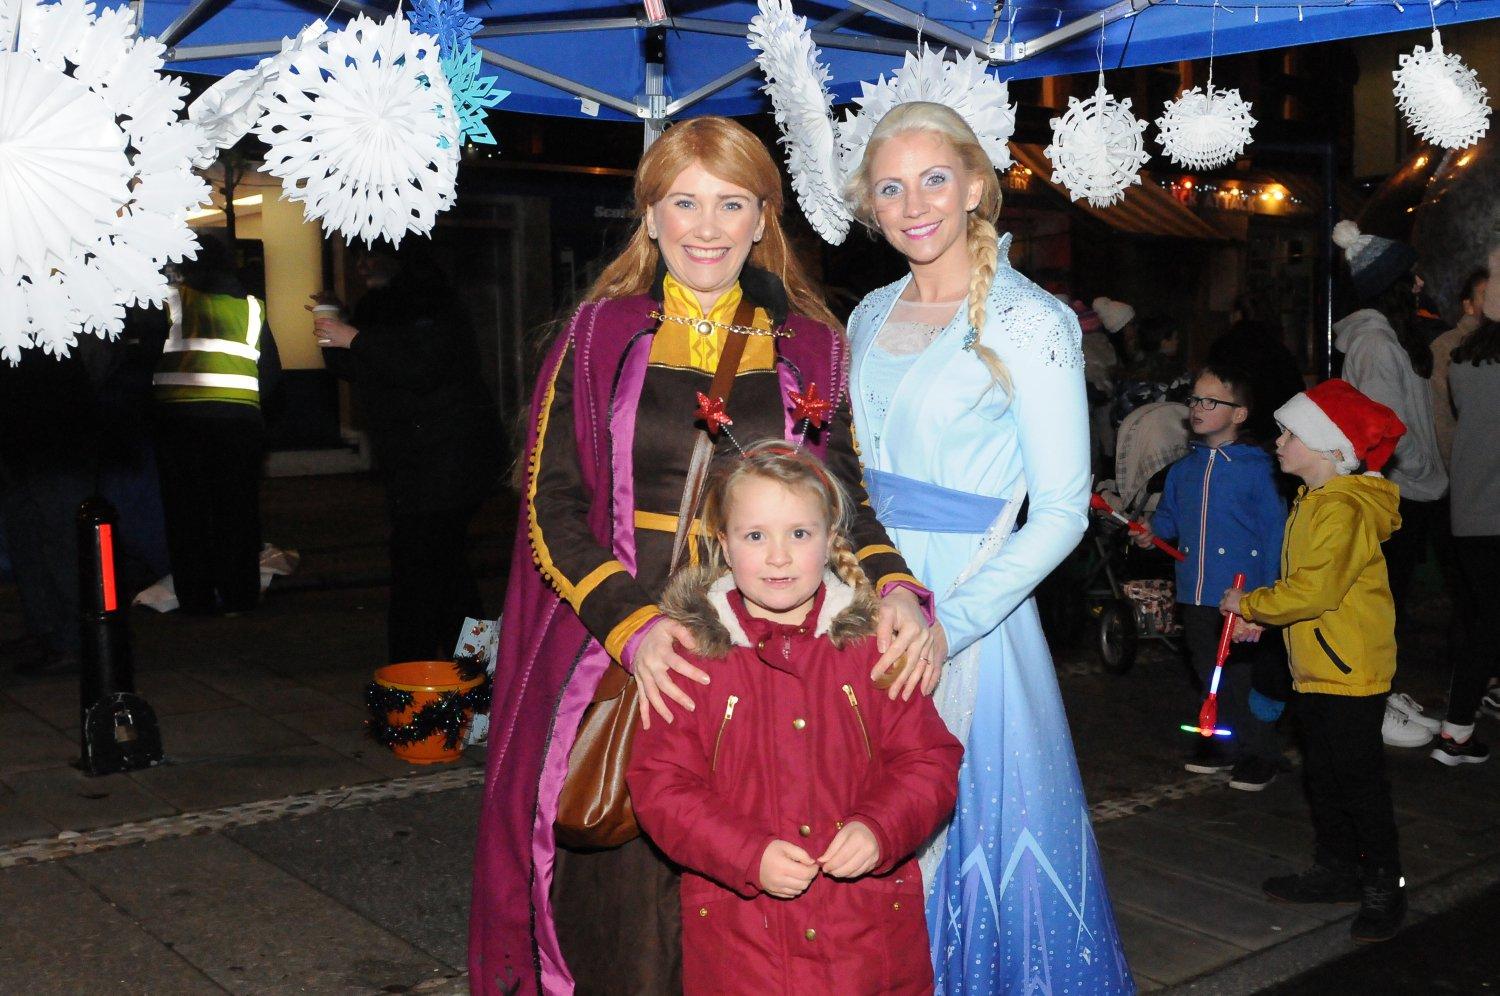 Young Lexi Robertson with Anna and Elsa from Frozen.